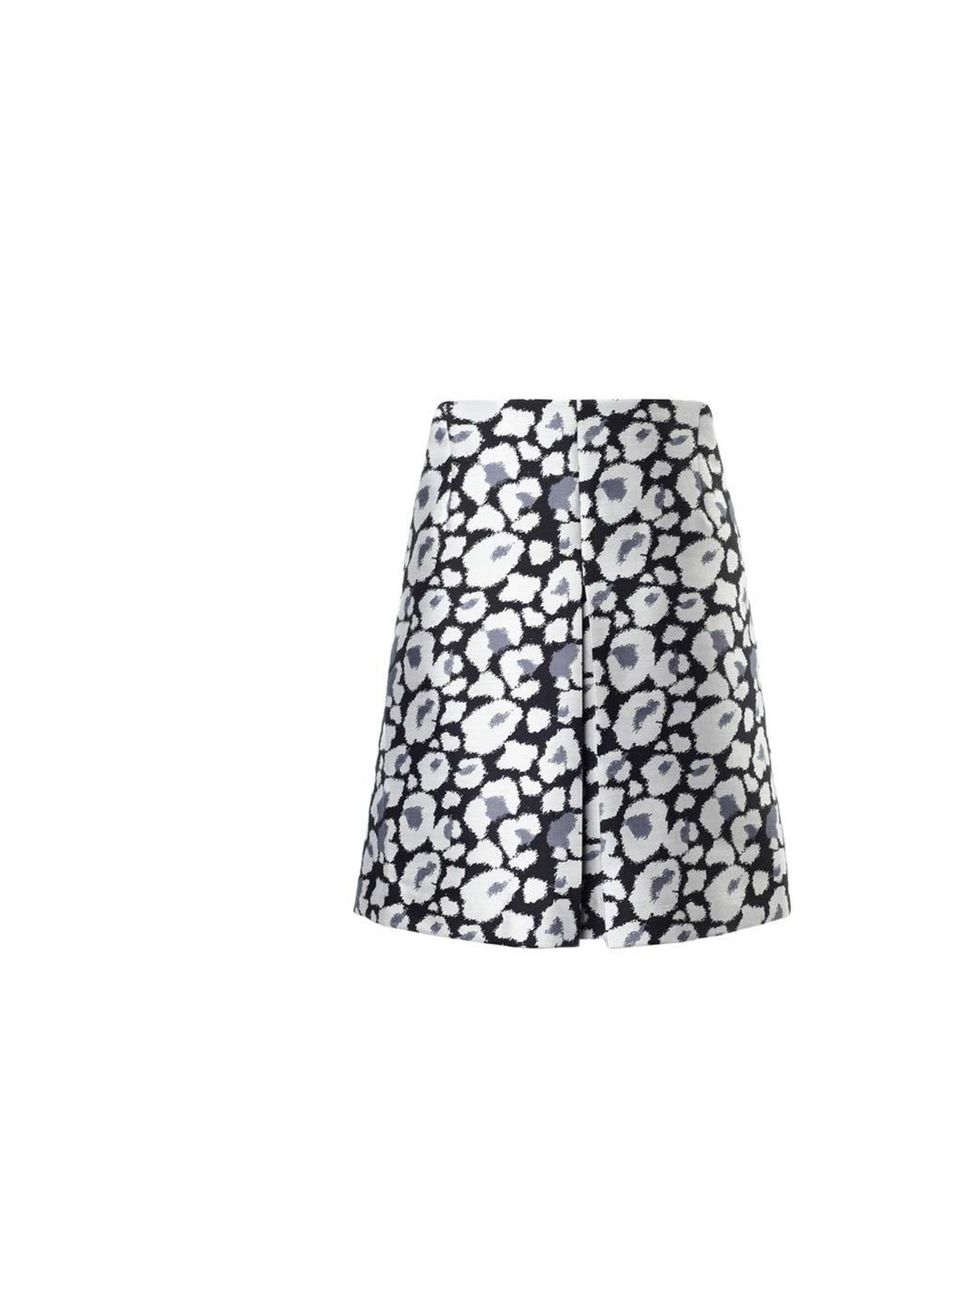 <p>A plain white t-shirt and nude sandals will balance out the bold print.</p><p>- Fern Ross, Chief Sub Editor / Production Editor</p><p><a href="http://www.whistles.co.uk/fcp/product/whistles//floral-leopard-box-pleat-skirt/903000060500">Whistles</a> ski